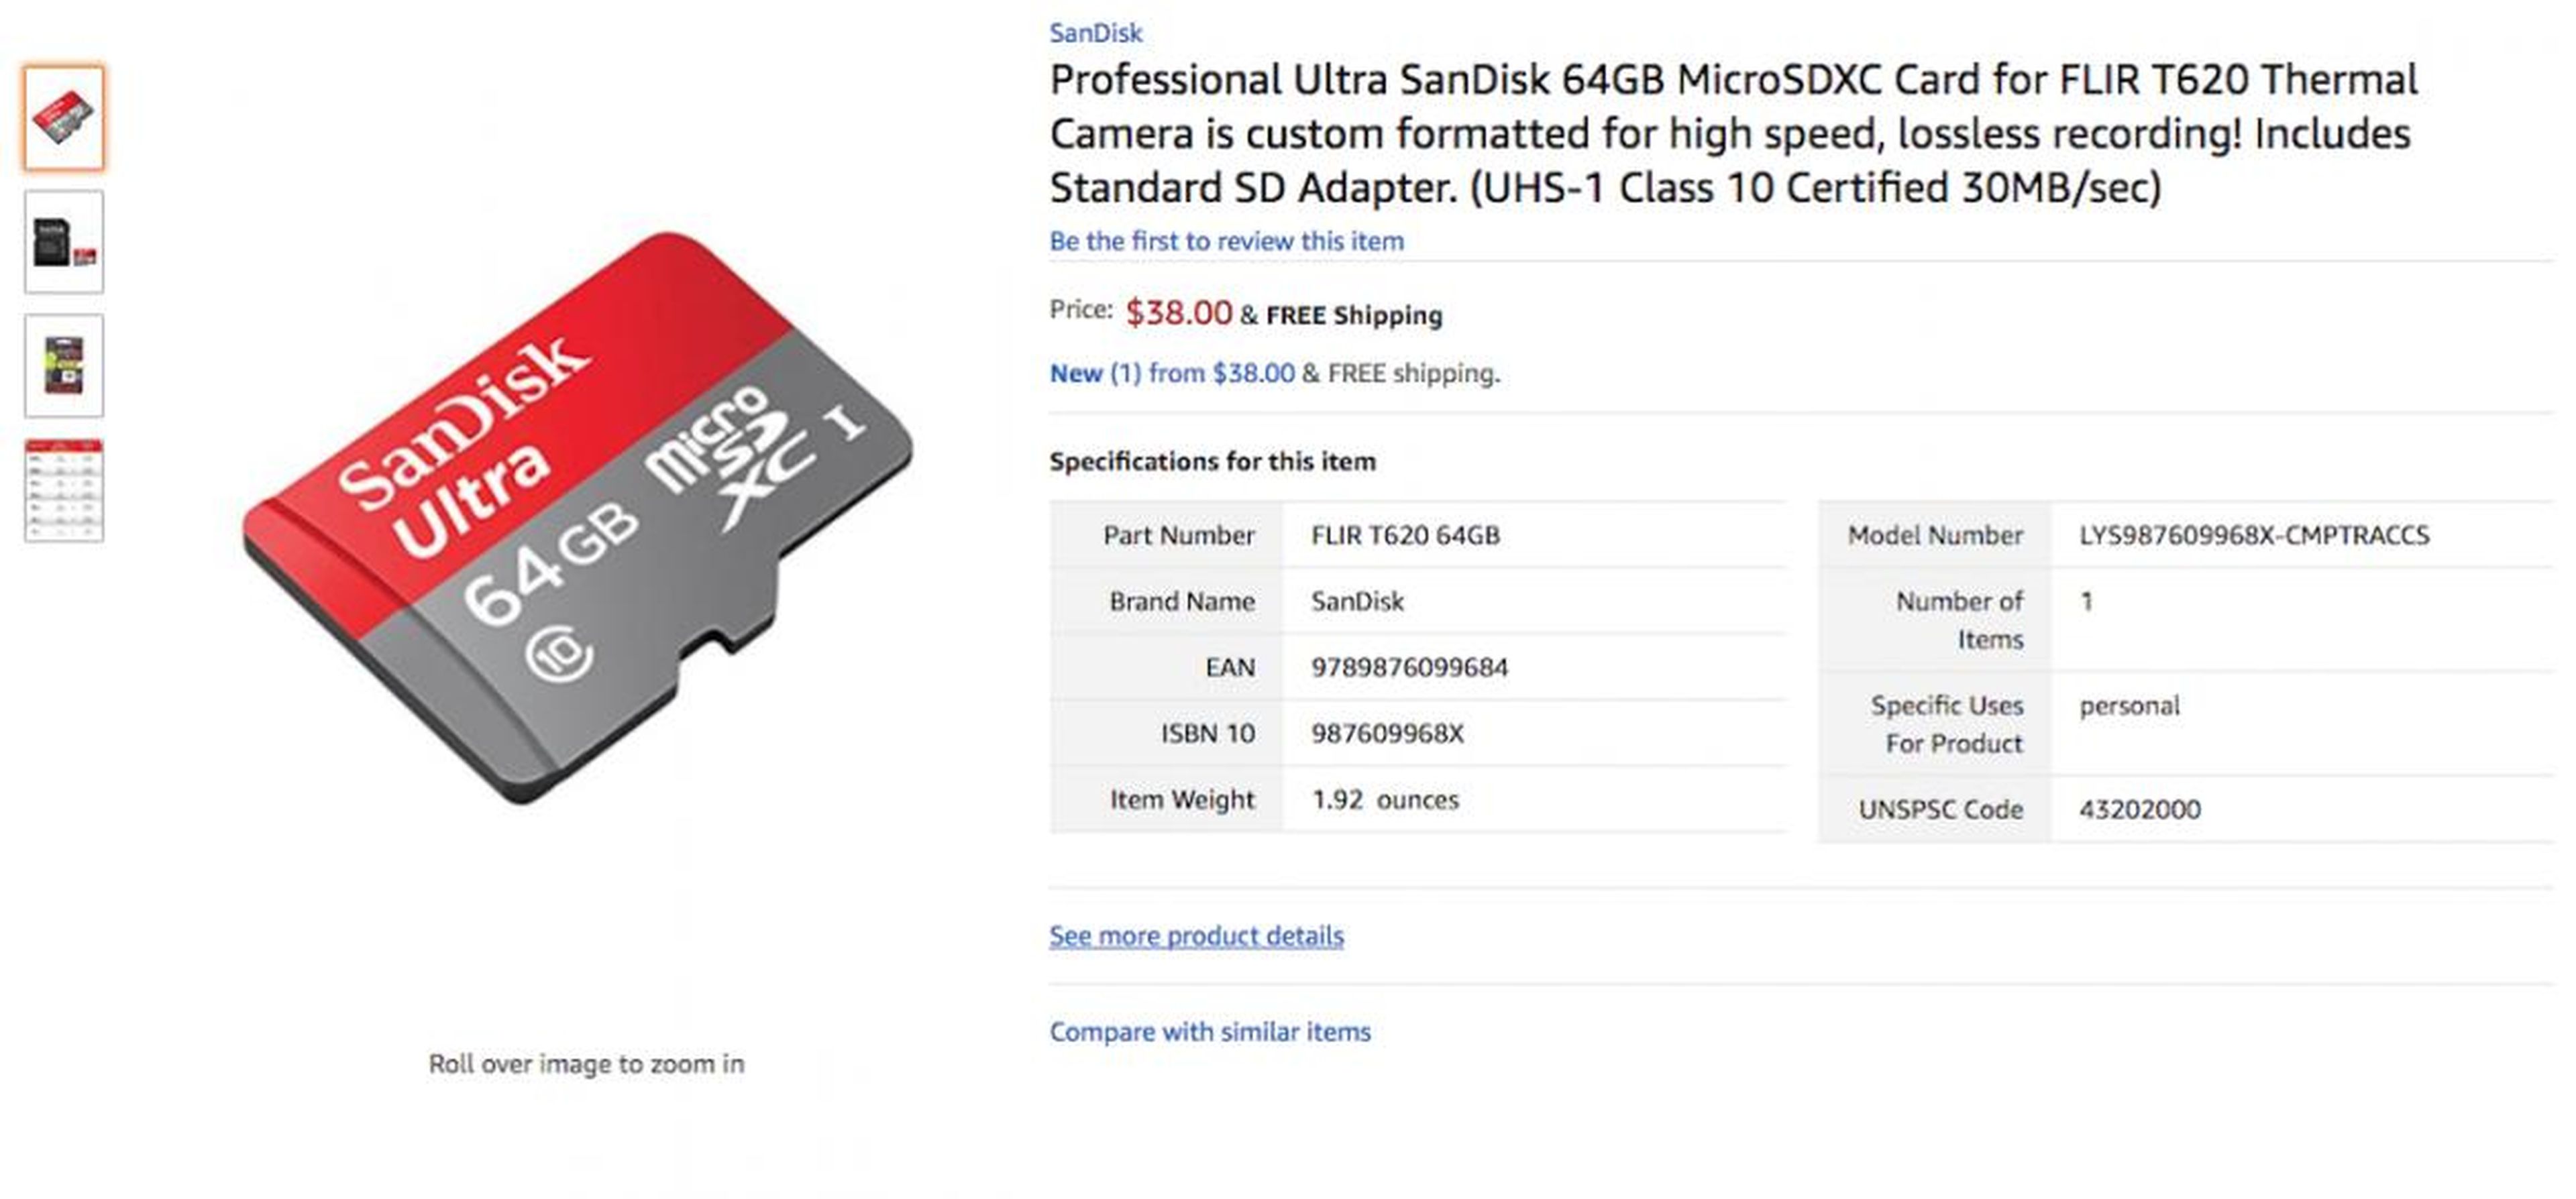 French shoppers were all about tech on Prime Day, with other top sellers including the <a href="https://amzn.to/2mprMaN">SanDisk Ultra 64GB memory card</a> and the <a href="https://amzn.to/2L4BoGB">TP Link Wi-Fi-connected plug</a>